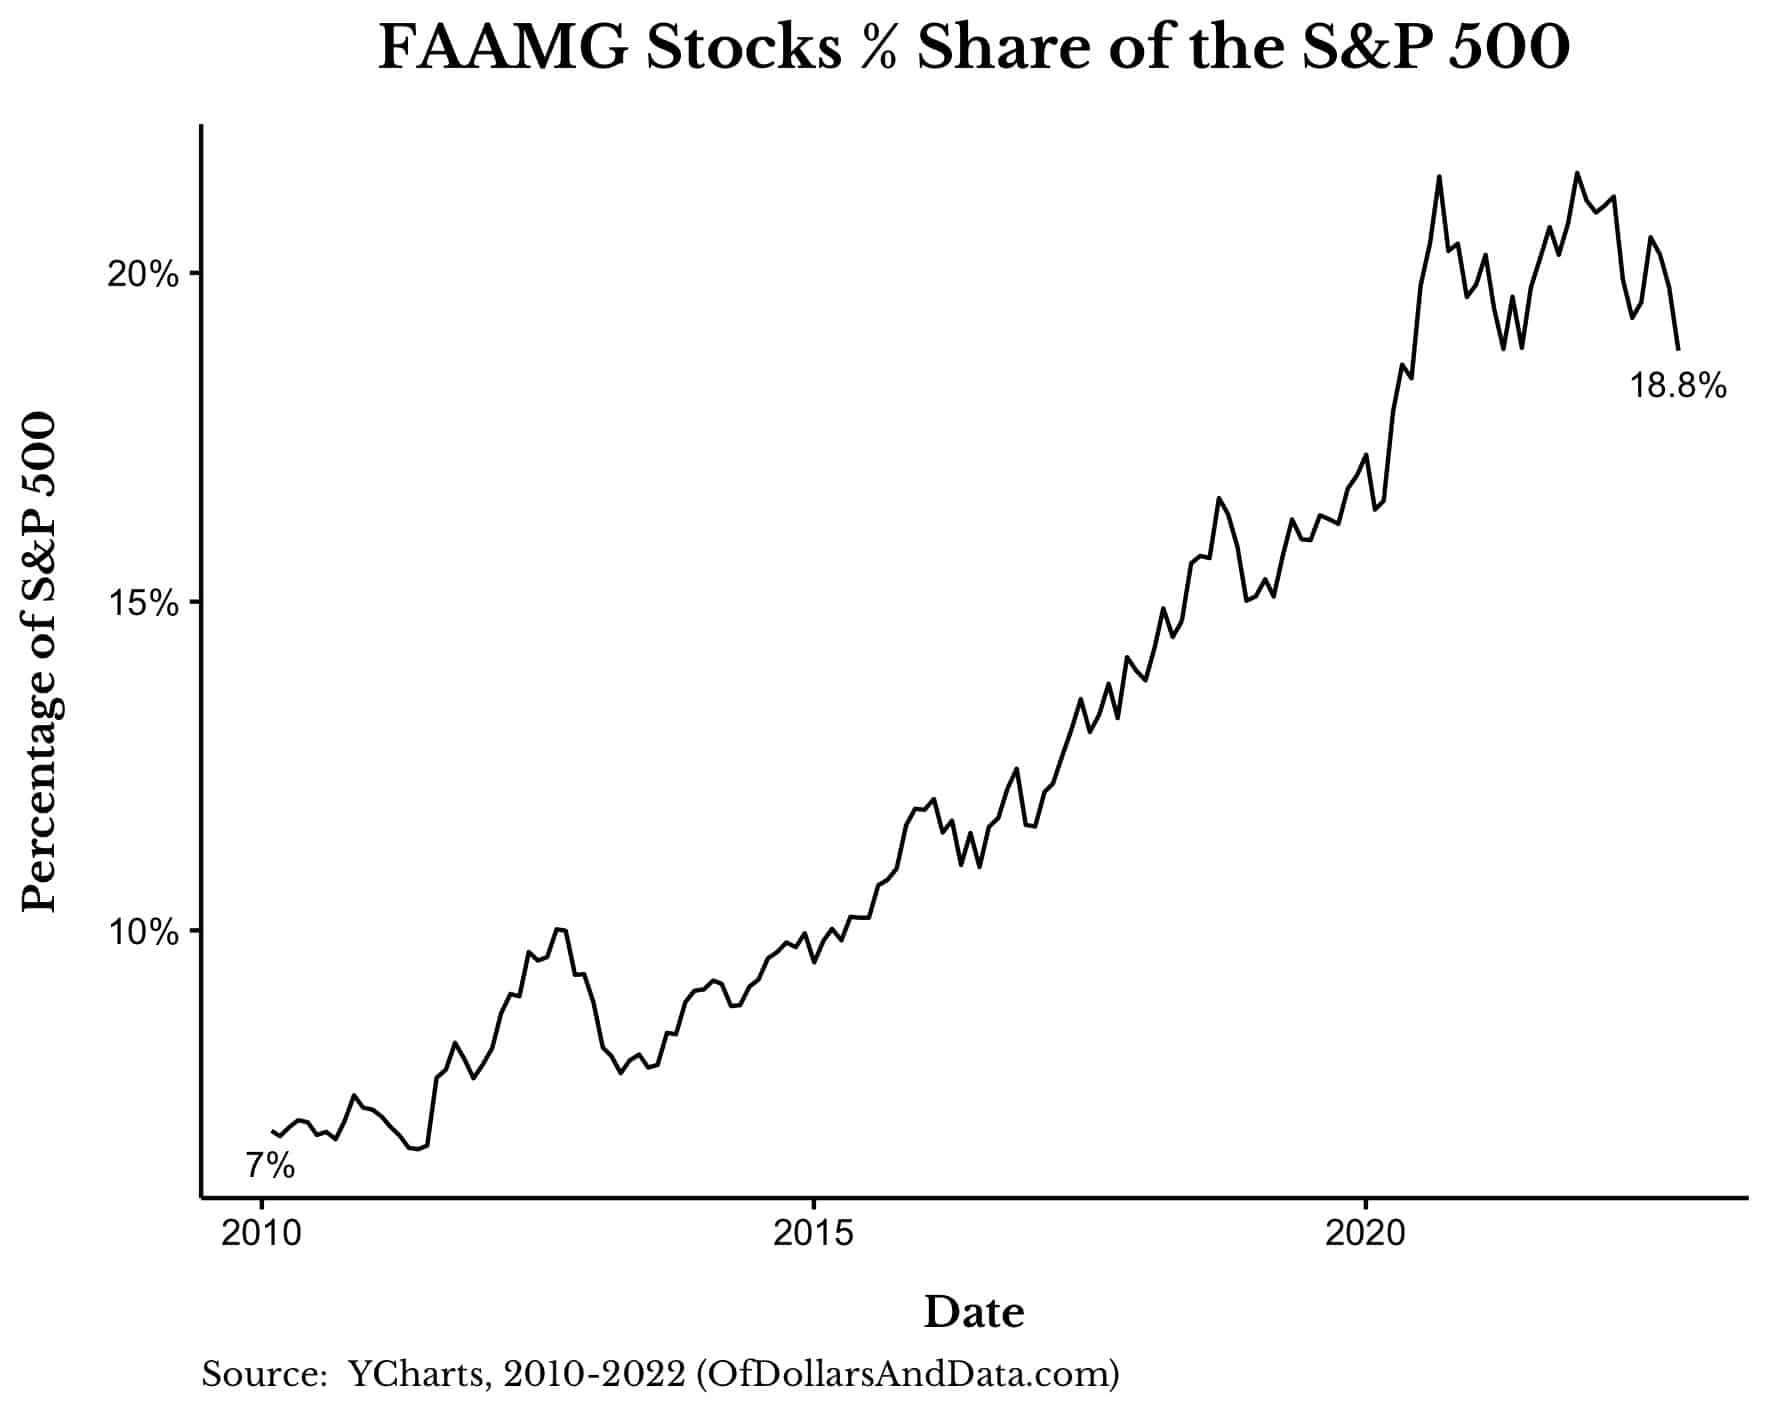 FAAMG stocks percentage share of the S&P 500 since 2010.